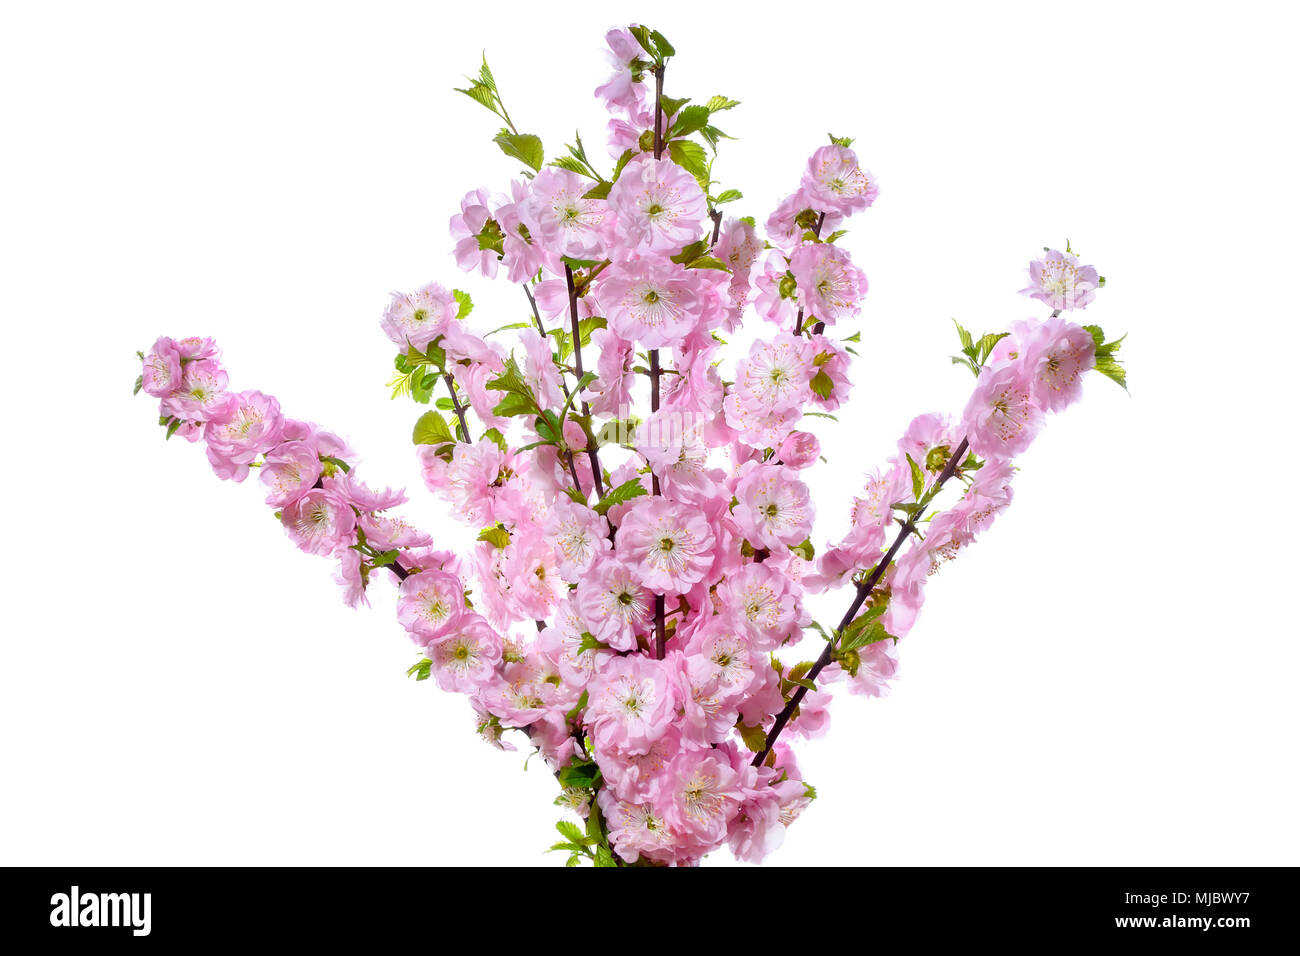 Bouquet of blooming almond twigs on a white background. Stock Photo